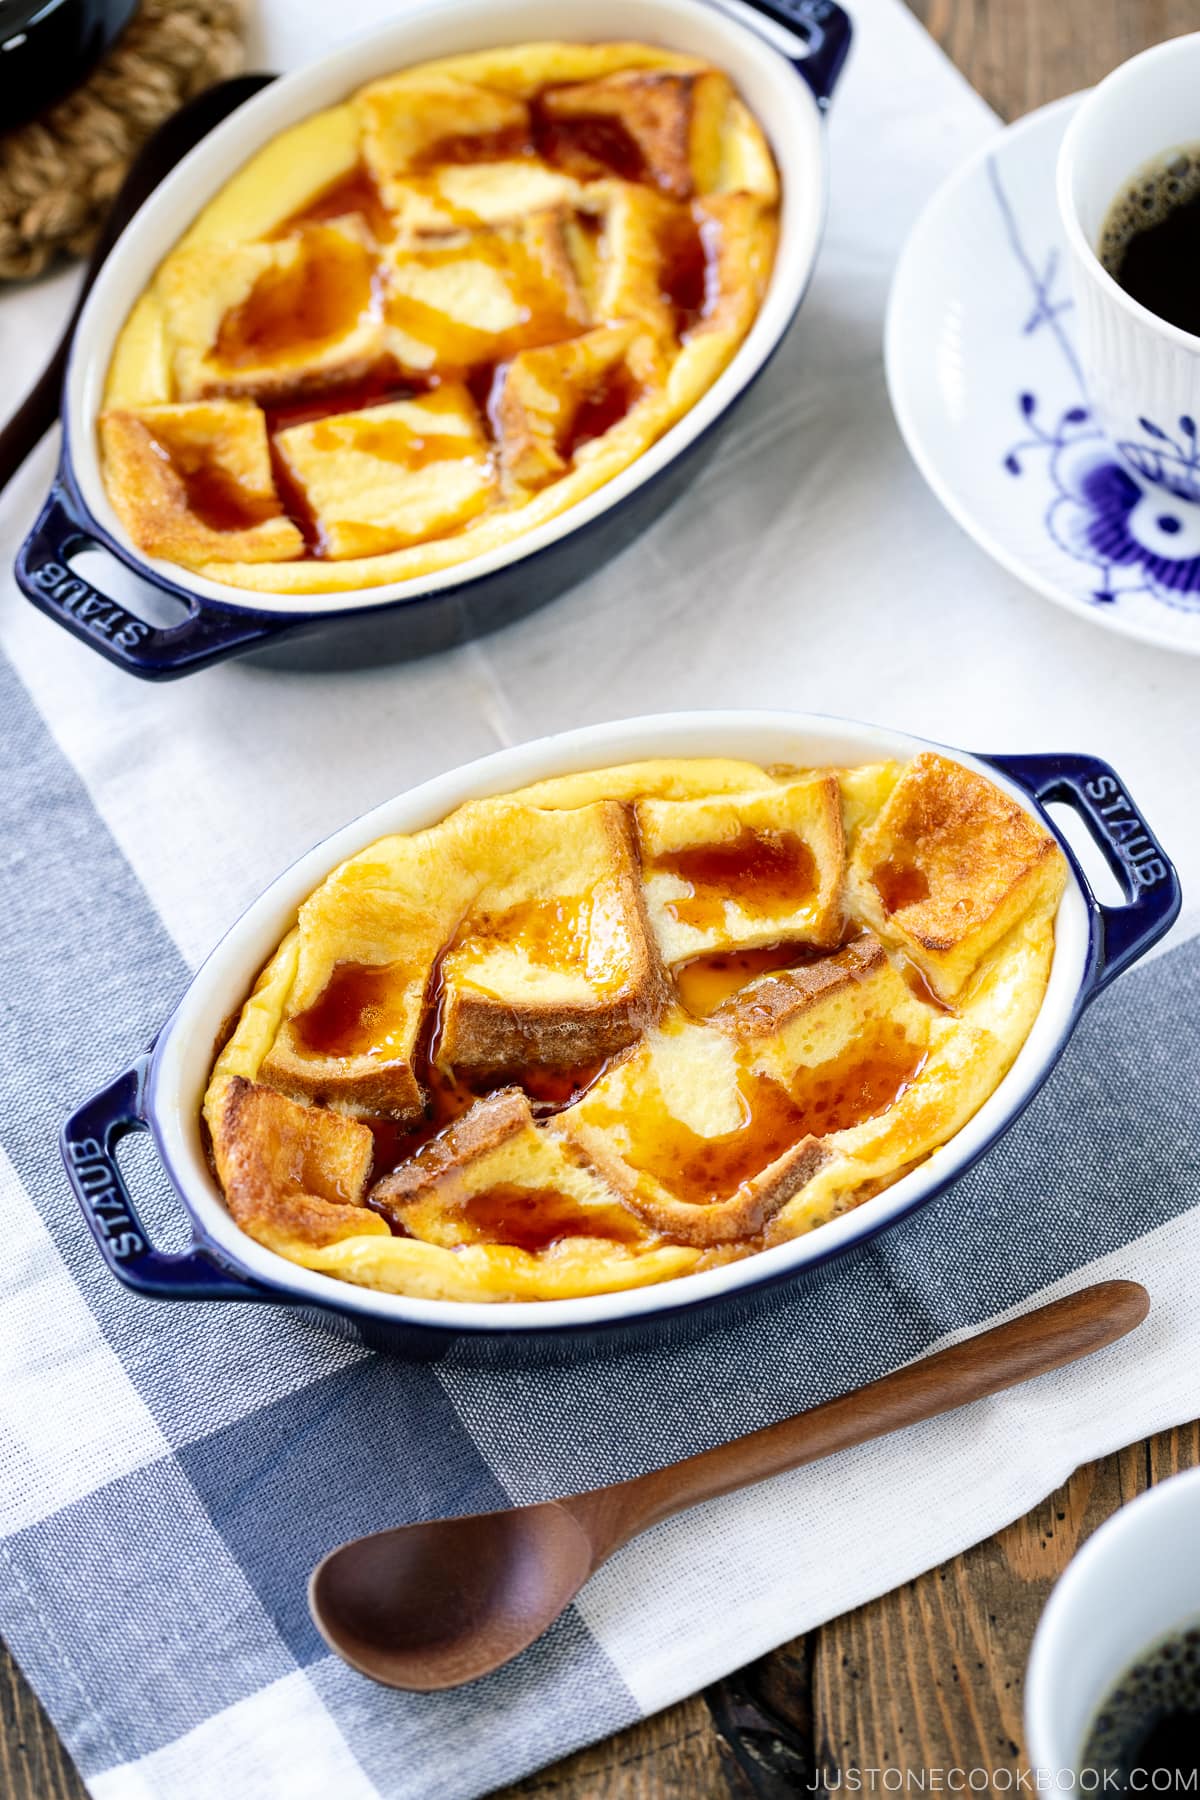 A gratin dish containing Pan Pudding (Japanese Bread Pudding) topped with a caramel sauce.